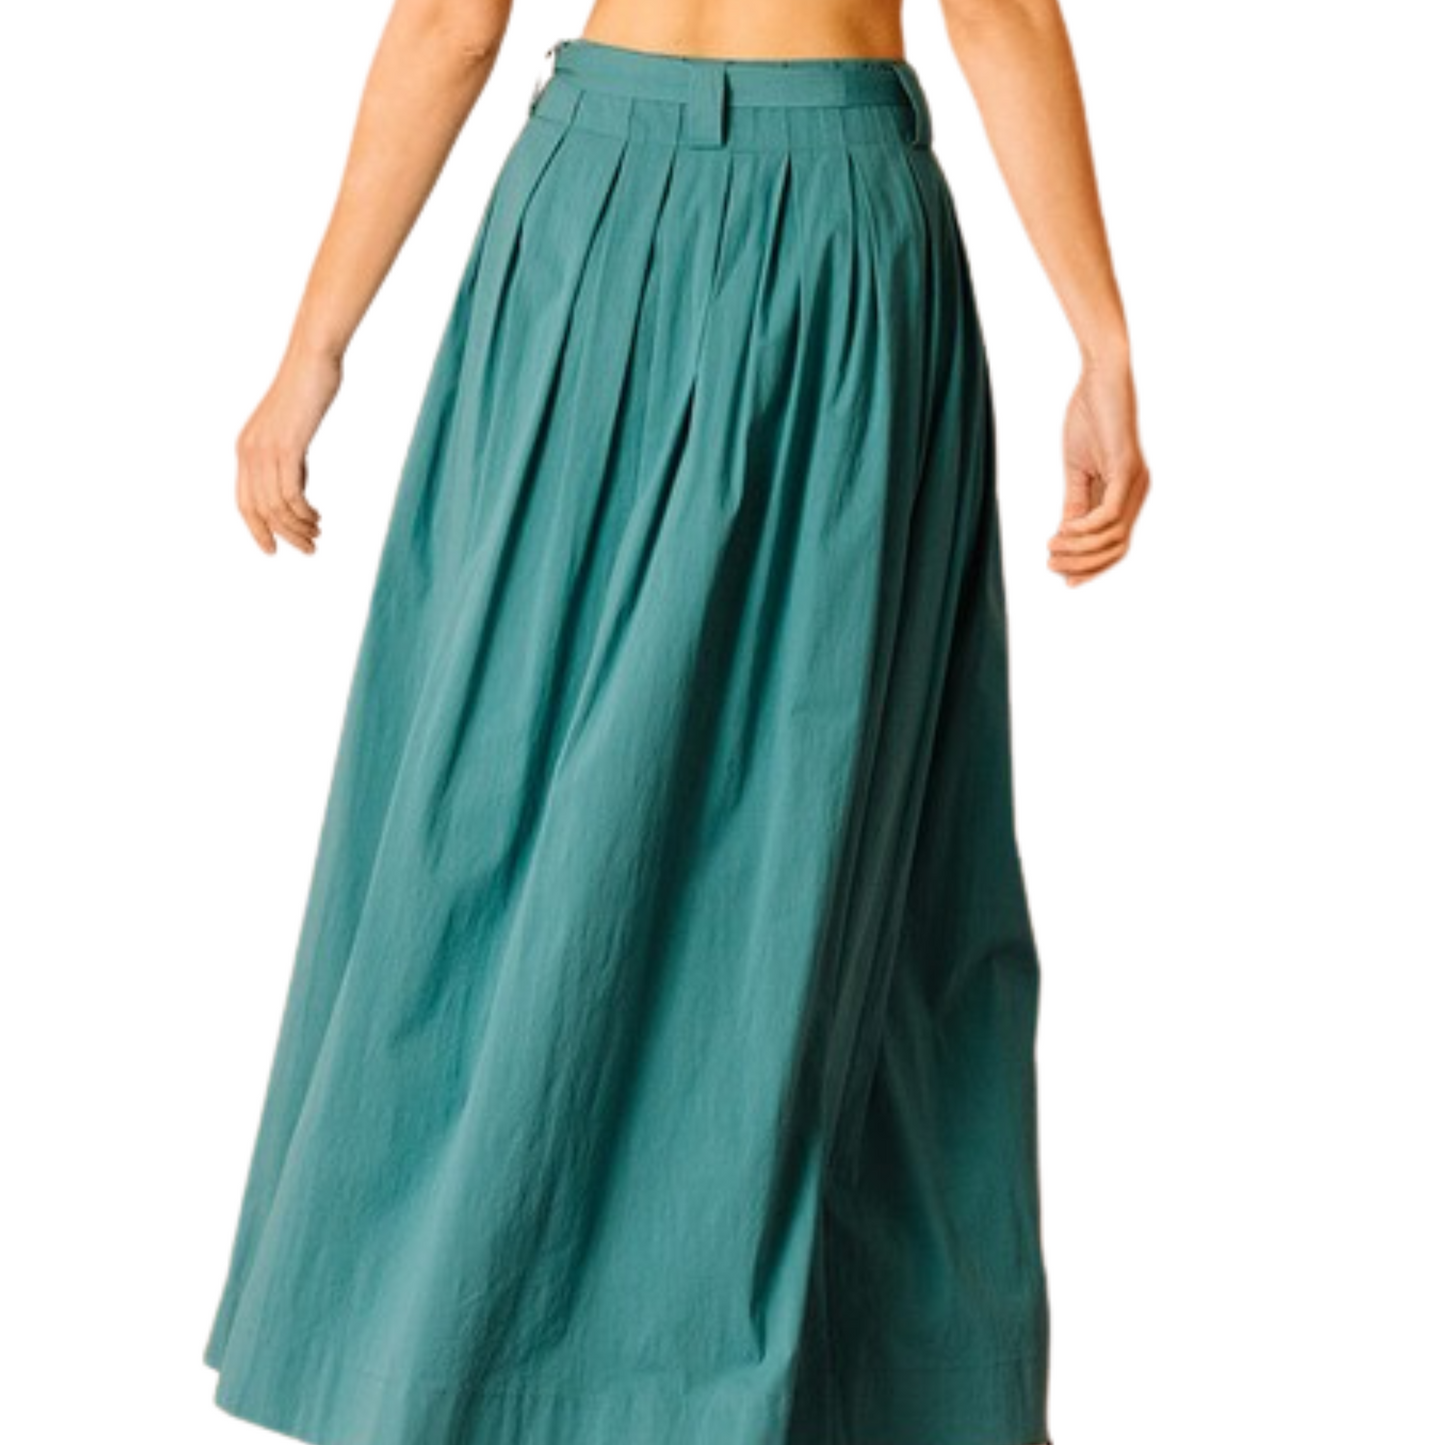 Deep blue high waisted maxi skirt with tie, worn by a woman from the back.